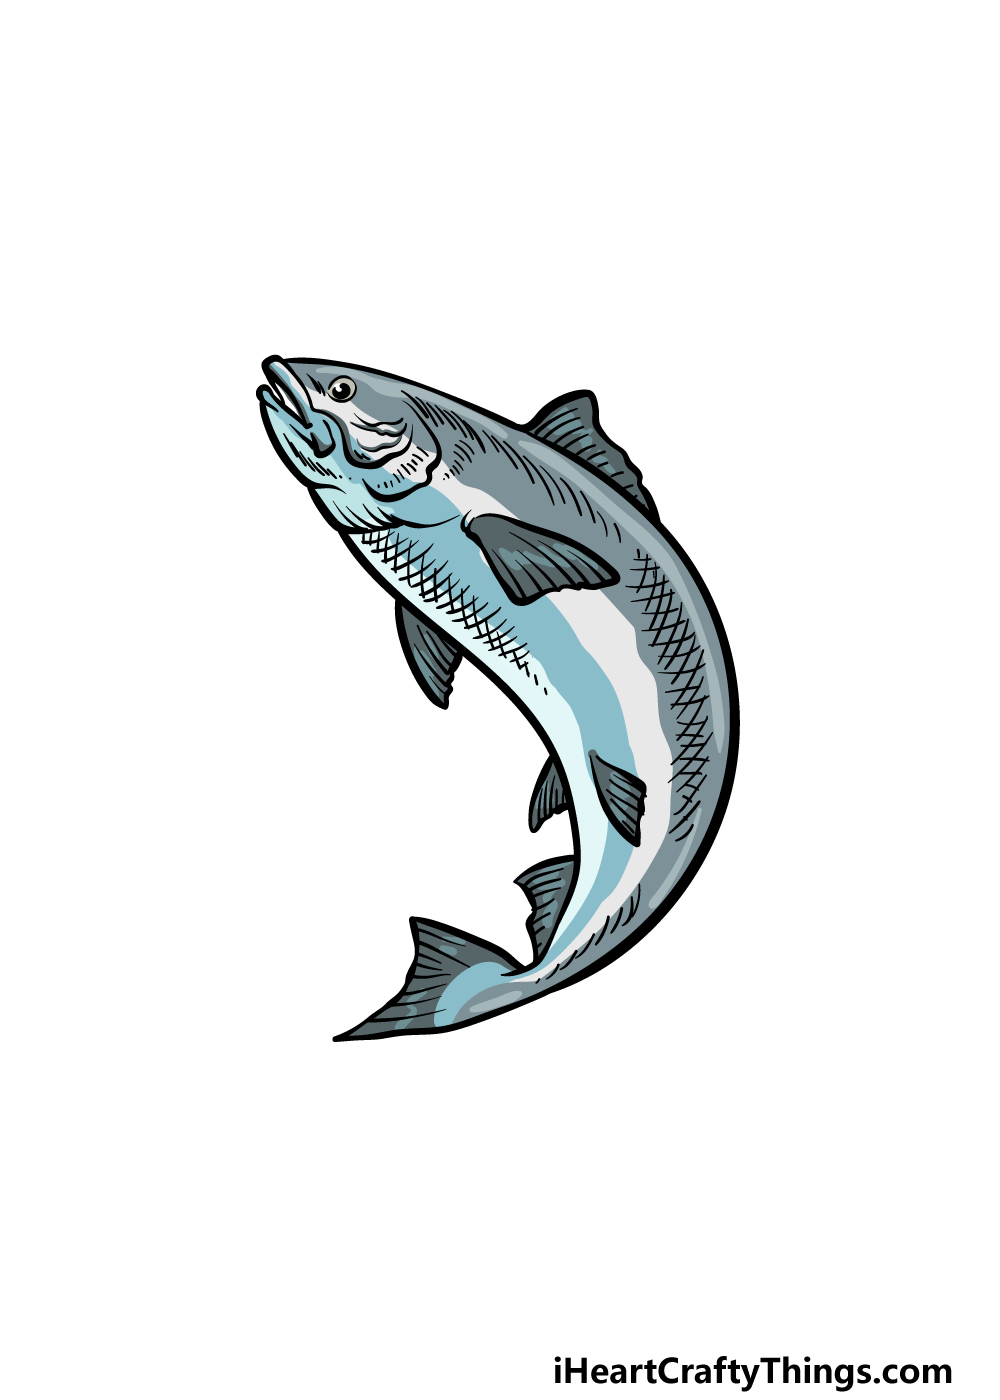 Salmon Drawing - How To Draw A Salmon Step By Step